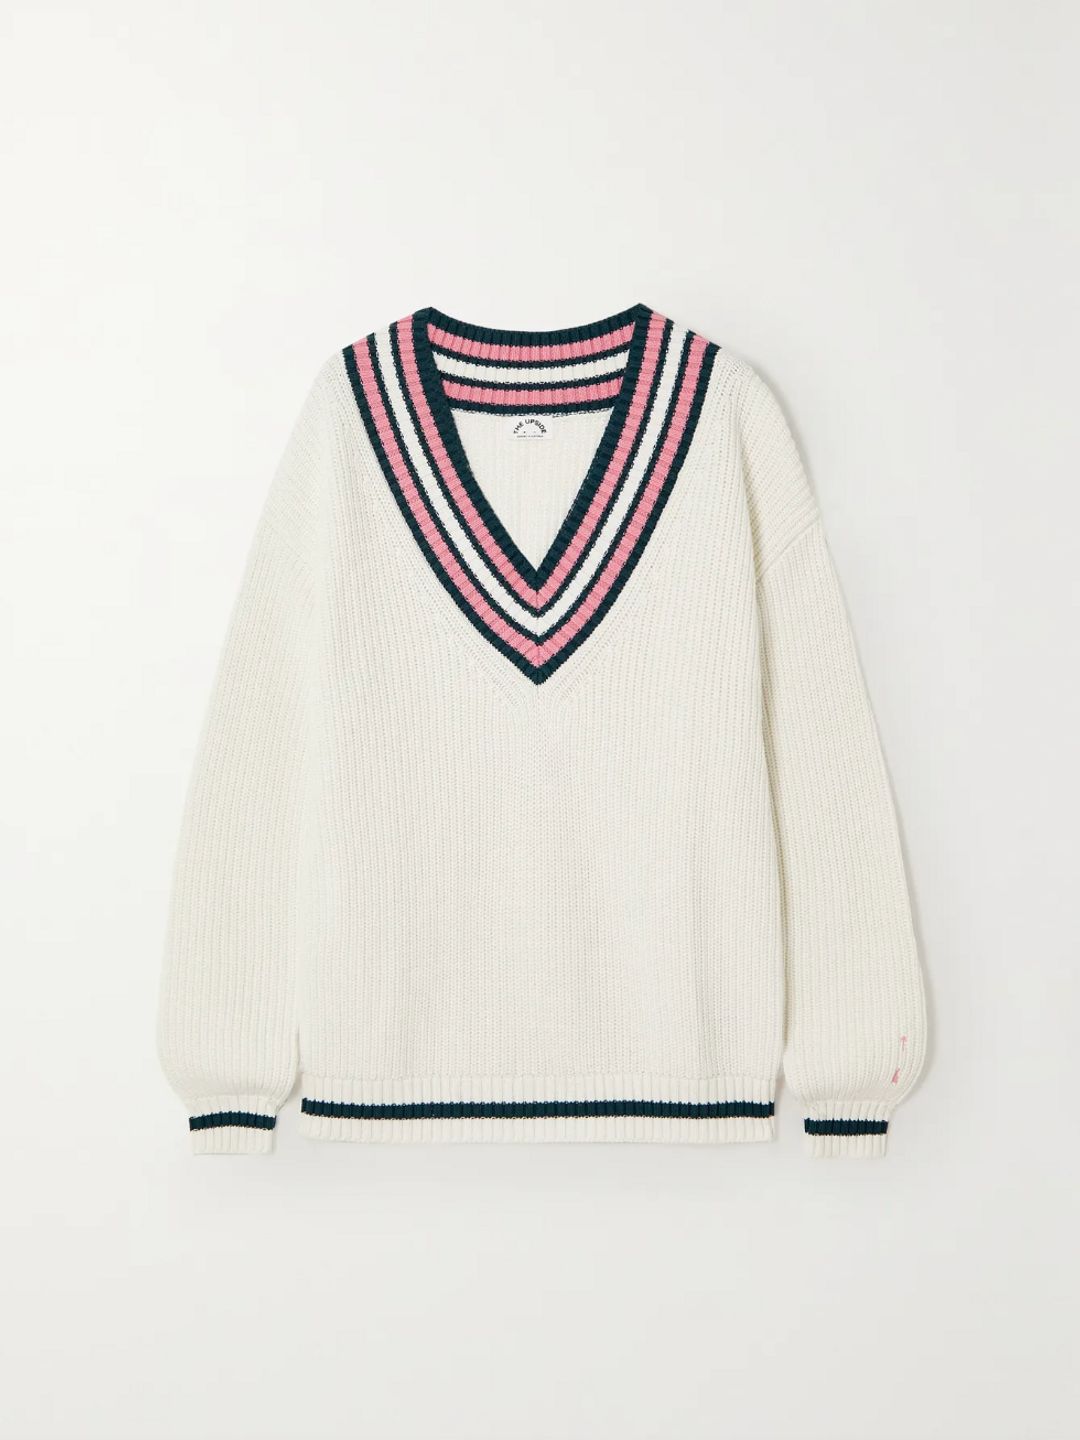 Louie striped knitted sweater - The Upside